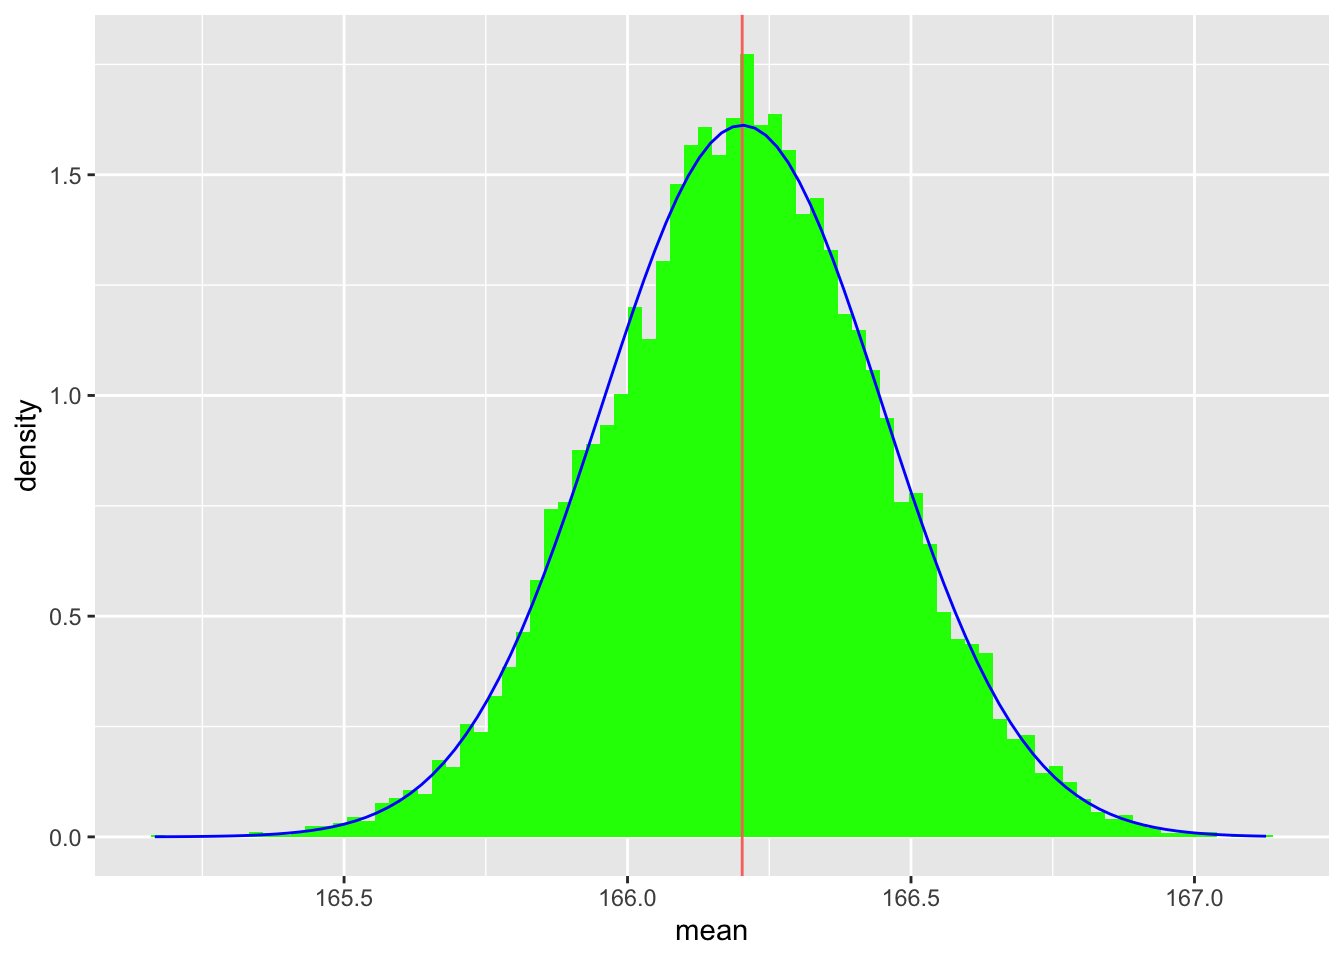 Histogram for means of samples of 100 from the bimodal distribution showing an approximately normal distribution centred around 166.2 centimetres. Distribution is less clearly normal than that for samples of 1000 shown previously.